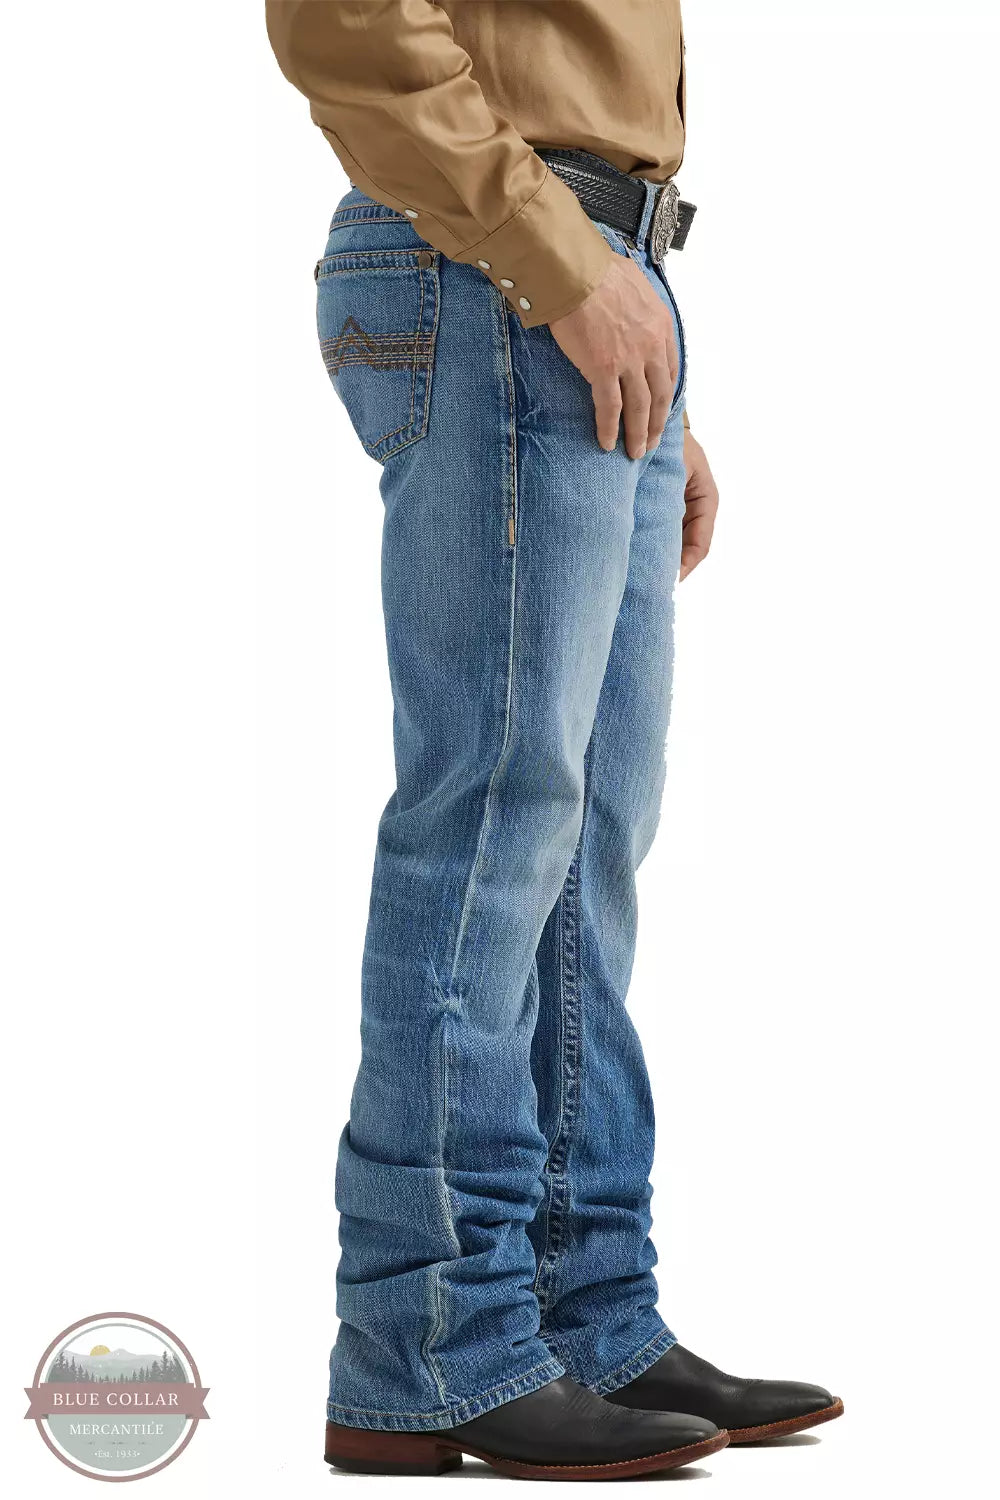 Wrangler 112346920 Rock 47 Slim Fit Bootcut Jeans Side View